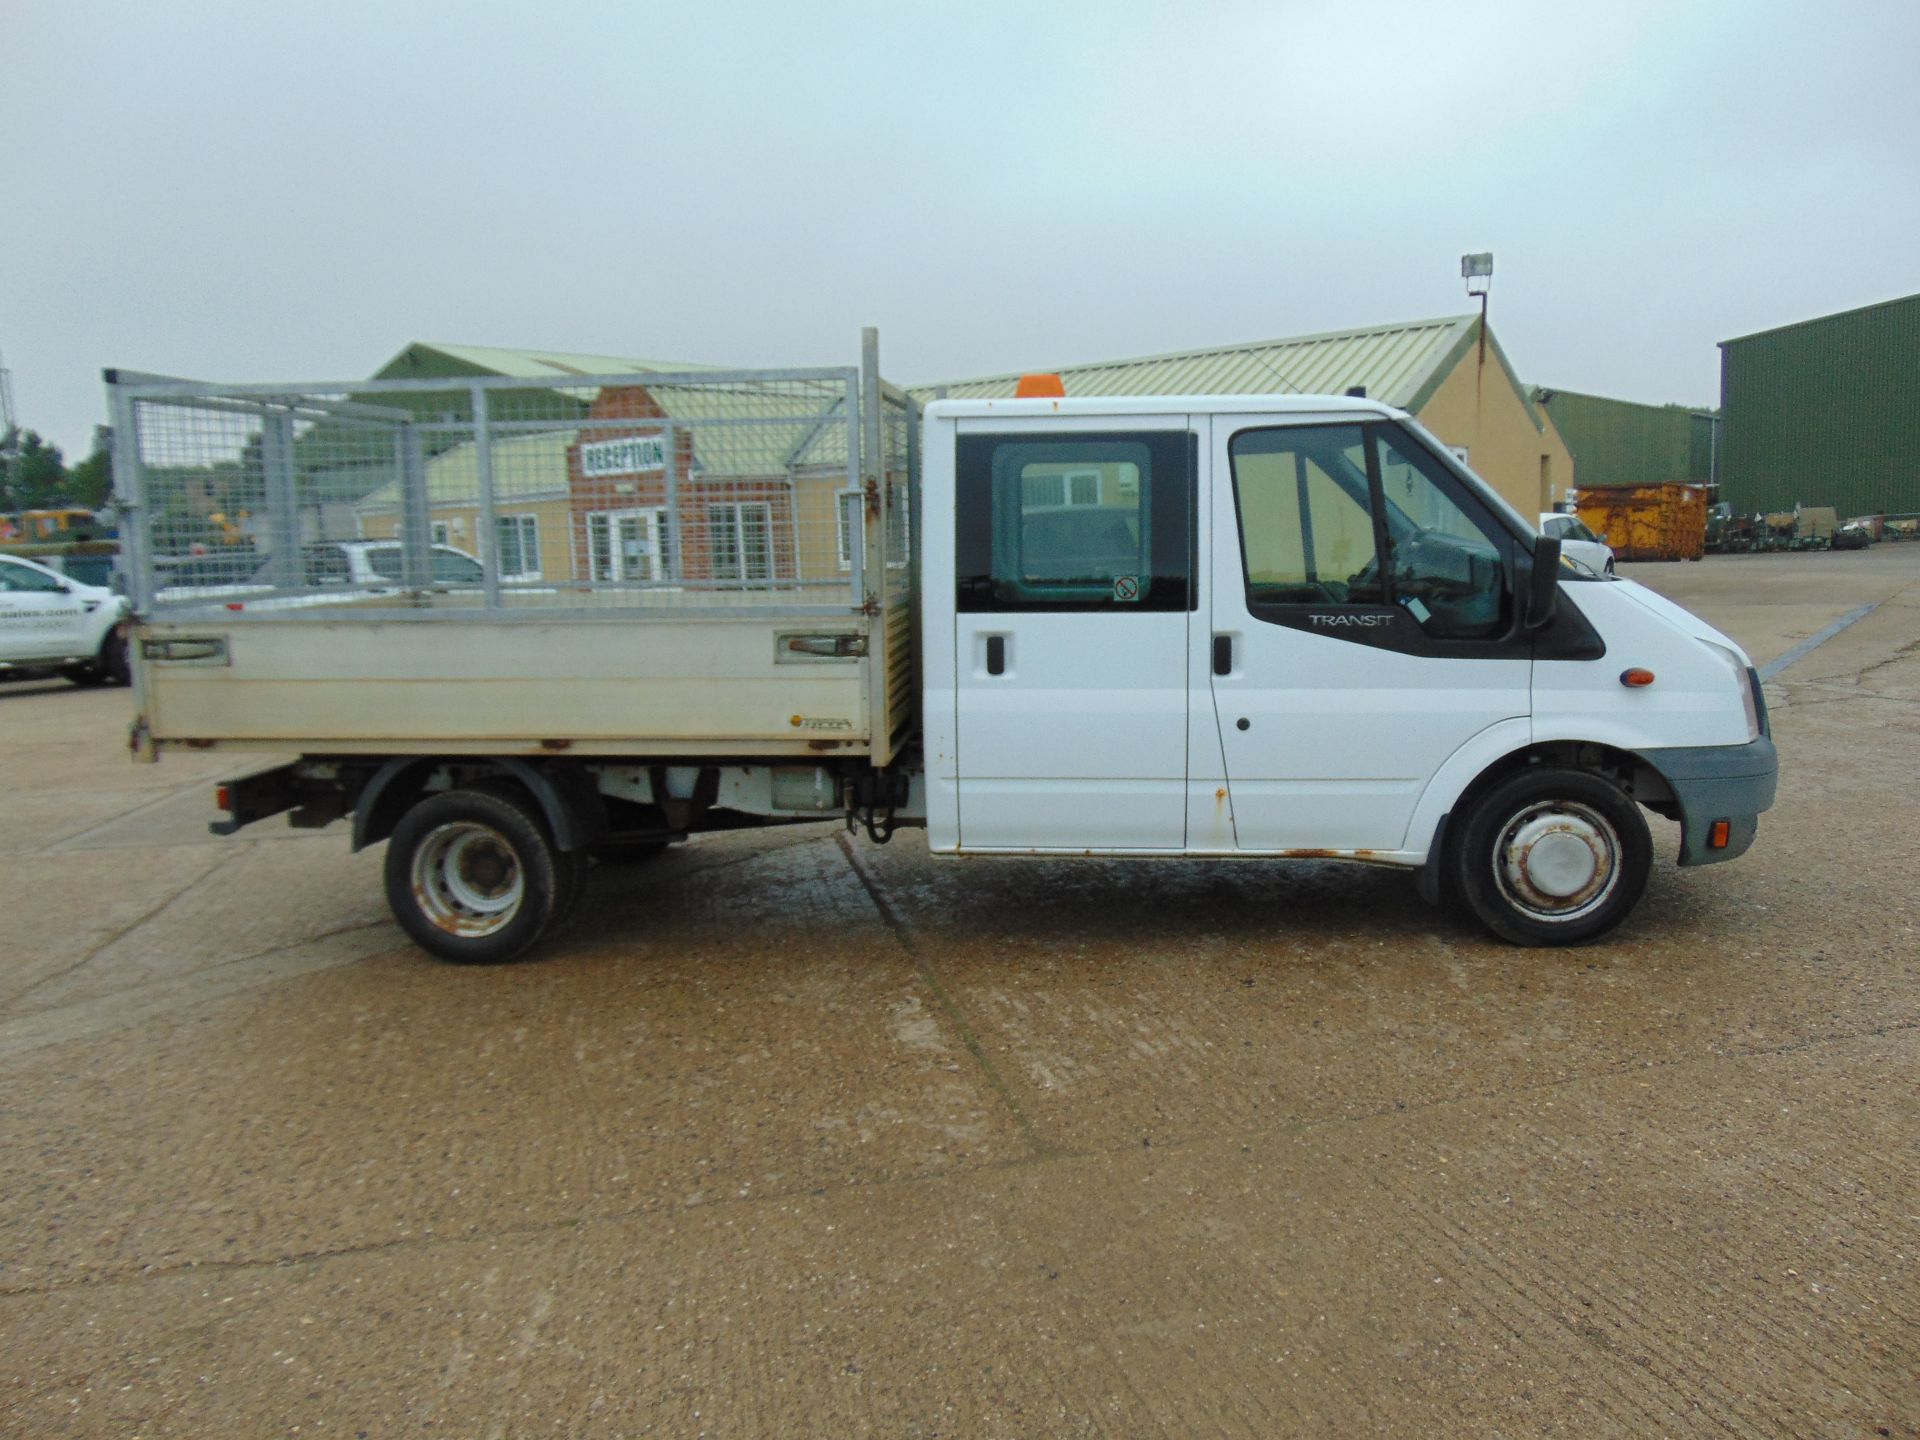 Ford Transit 115 T350 Crew Cab Flat Bed Tipper - Image 7 of 16